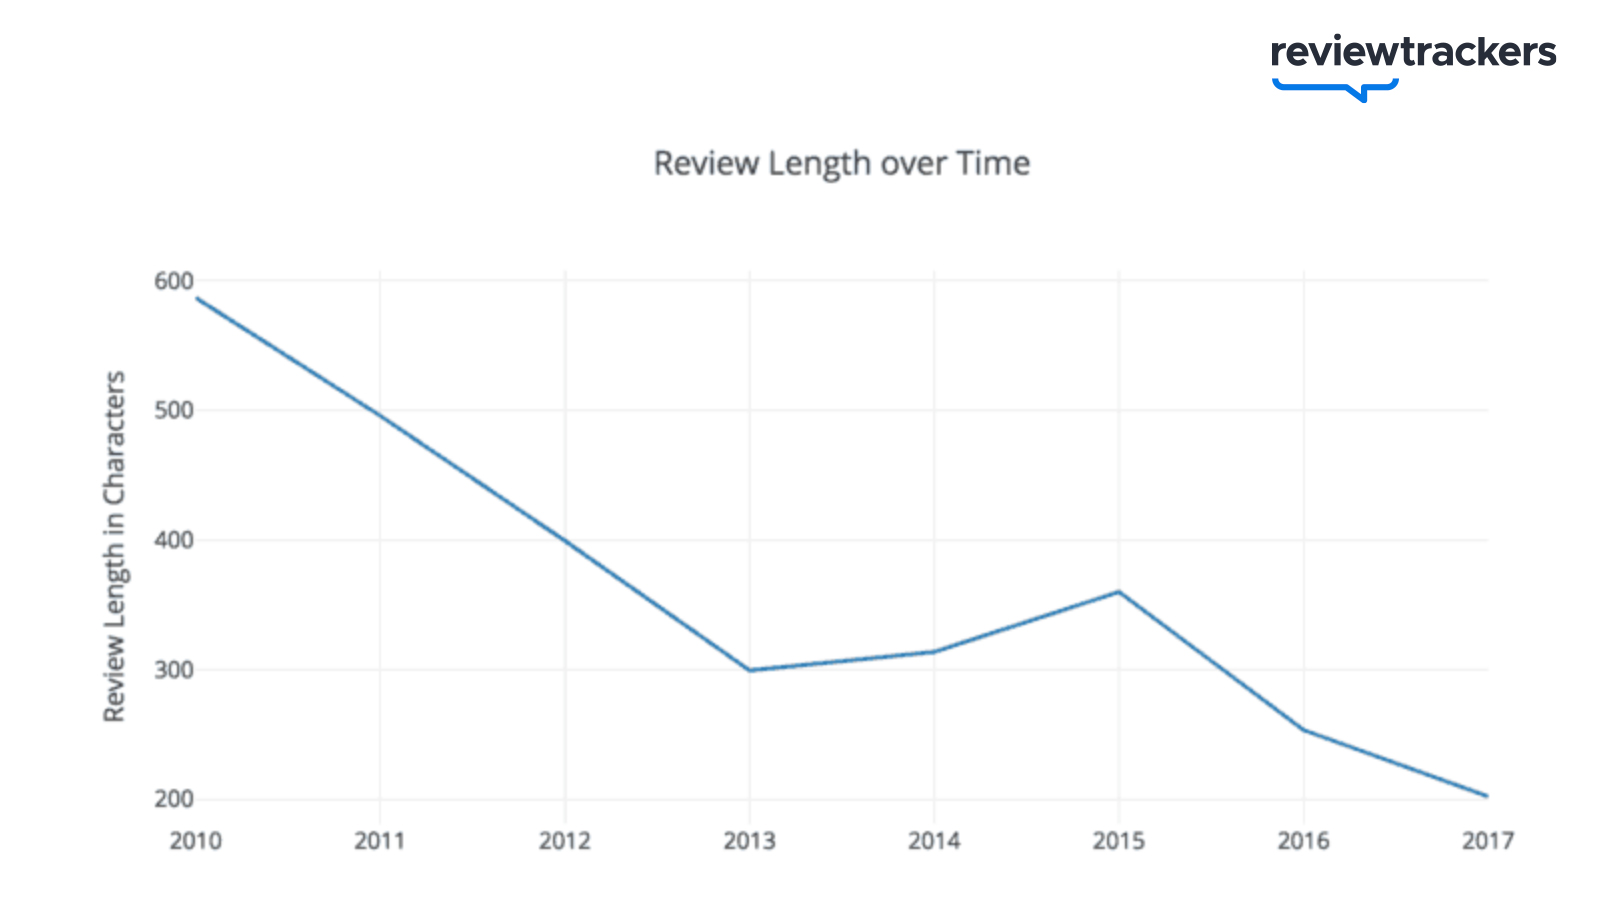 2018 ReviewTrackers Online Reviews Stats and Survey | ReviewTrackers